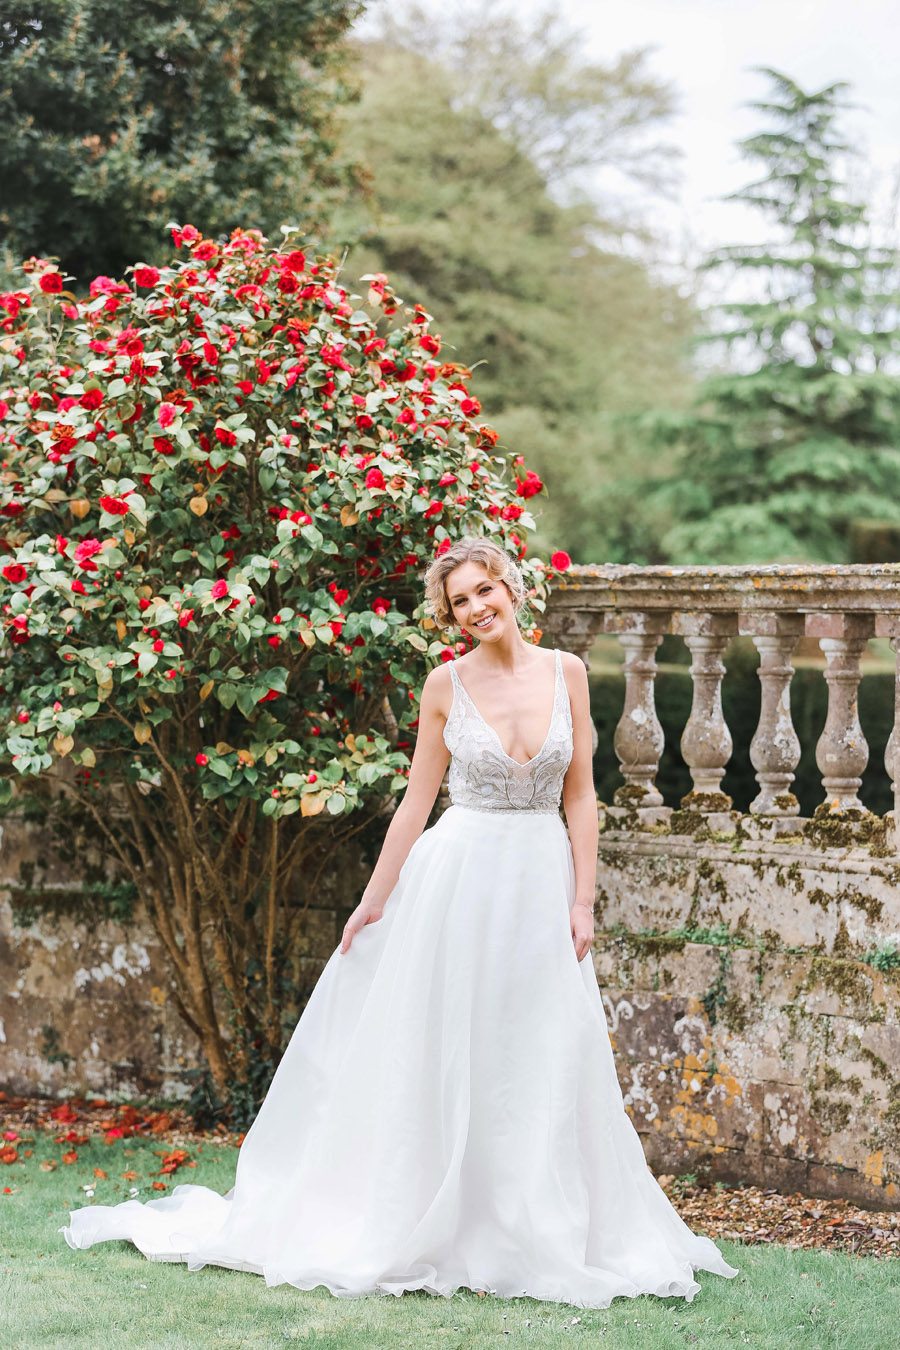 Romantic wedding ideas from Hale Park, photo by Charlotte Wise Photography (47)